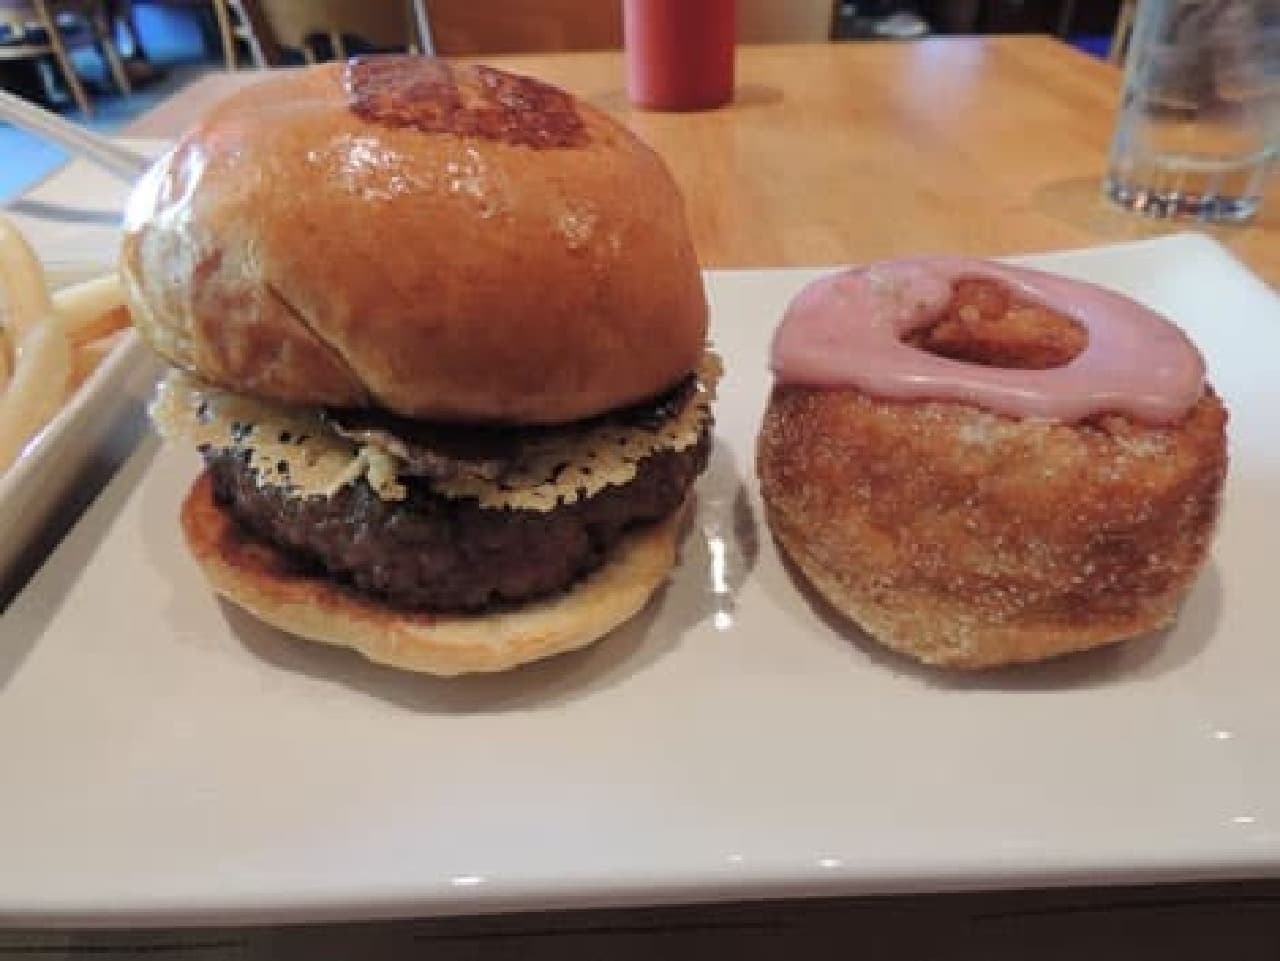 Umami burger and cronuts purchased by Mr. Schonfeld. If you eat it as it is, it will surely be delicious.